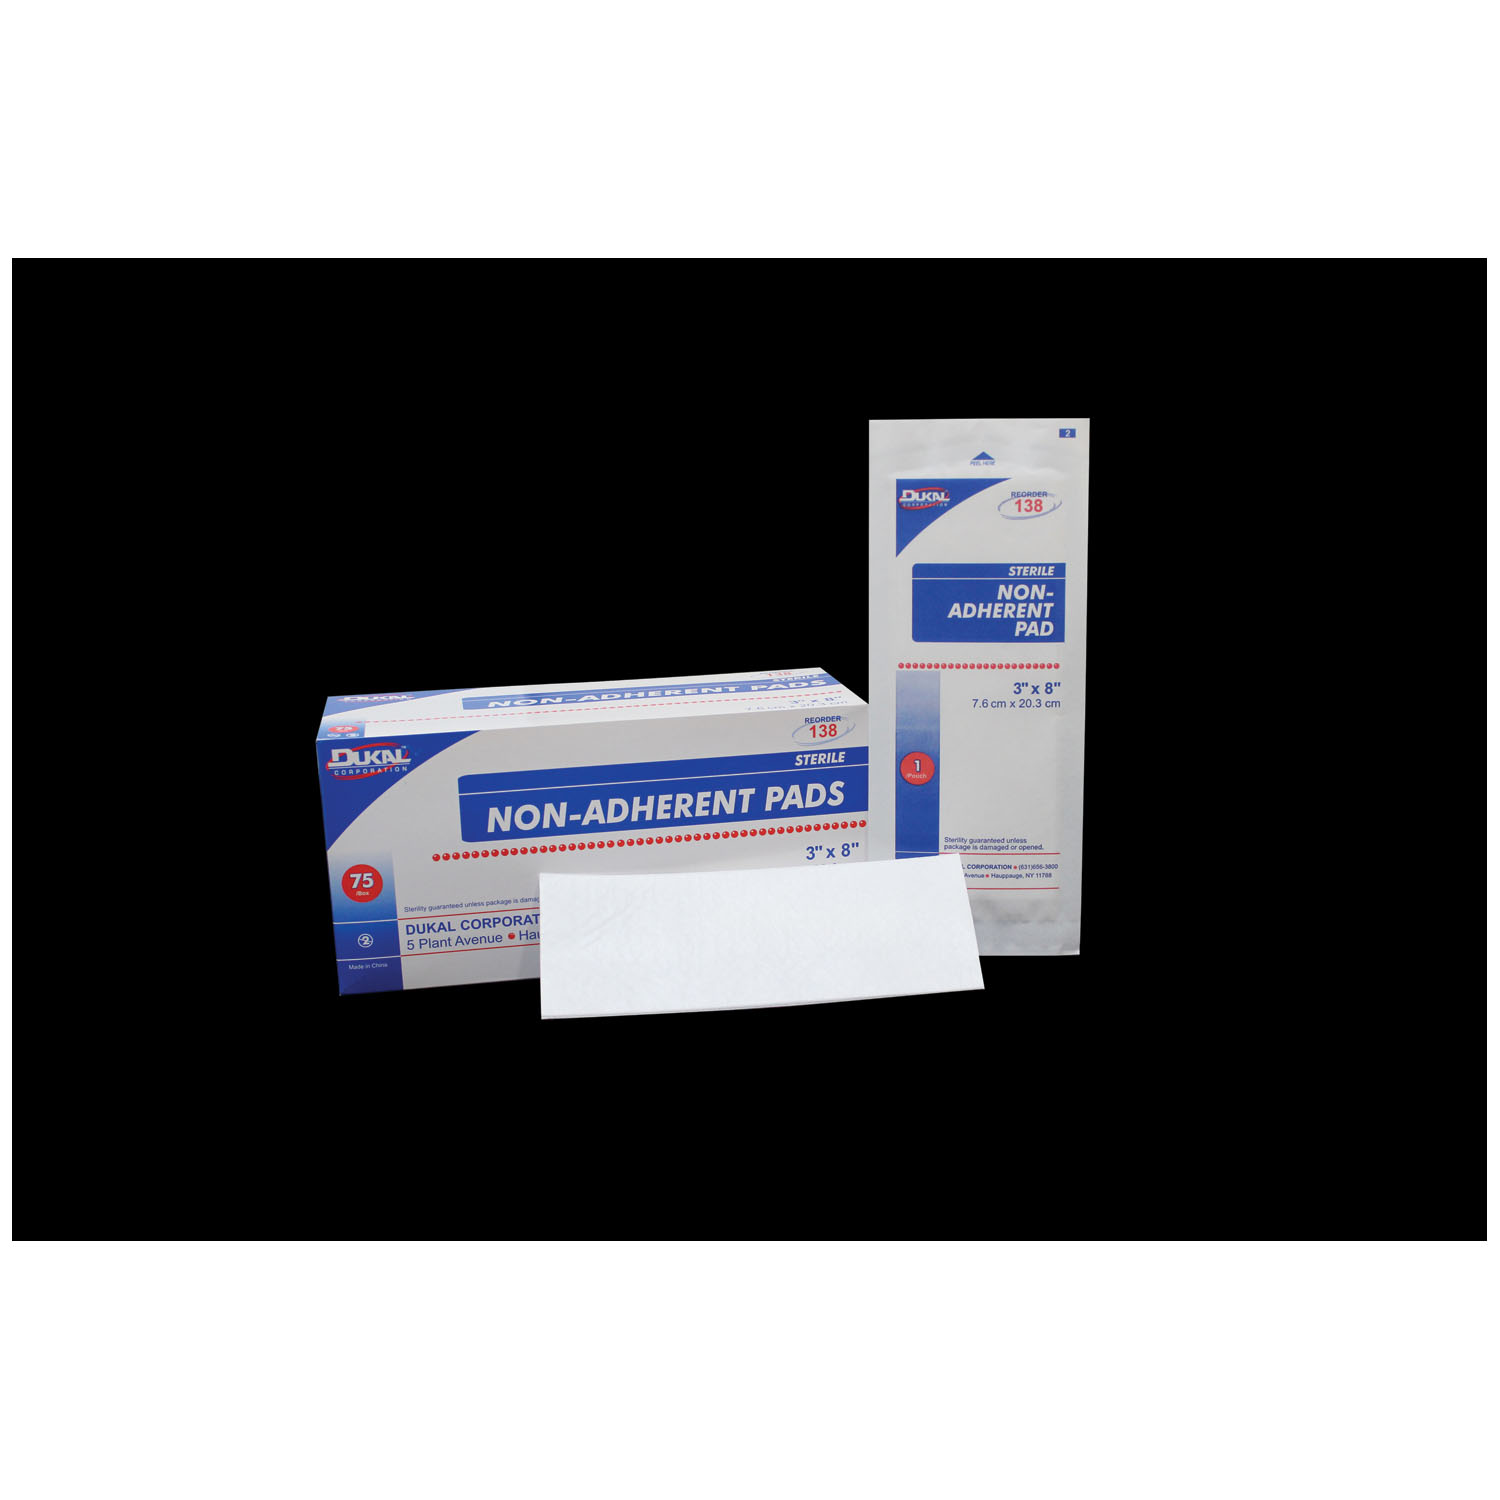 DUKAL NON-ADHERENT PADS : 138 BX $22.86 Stocked